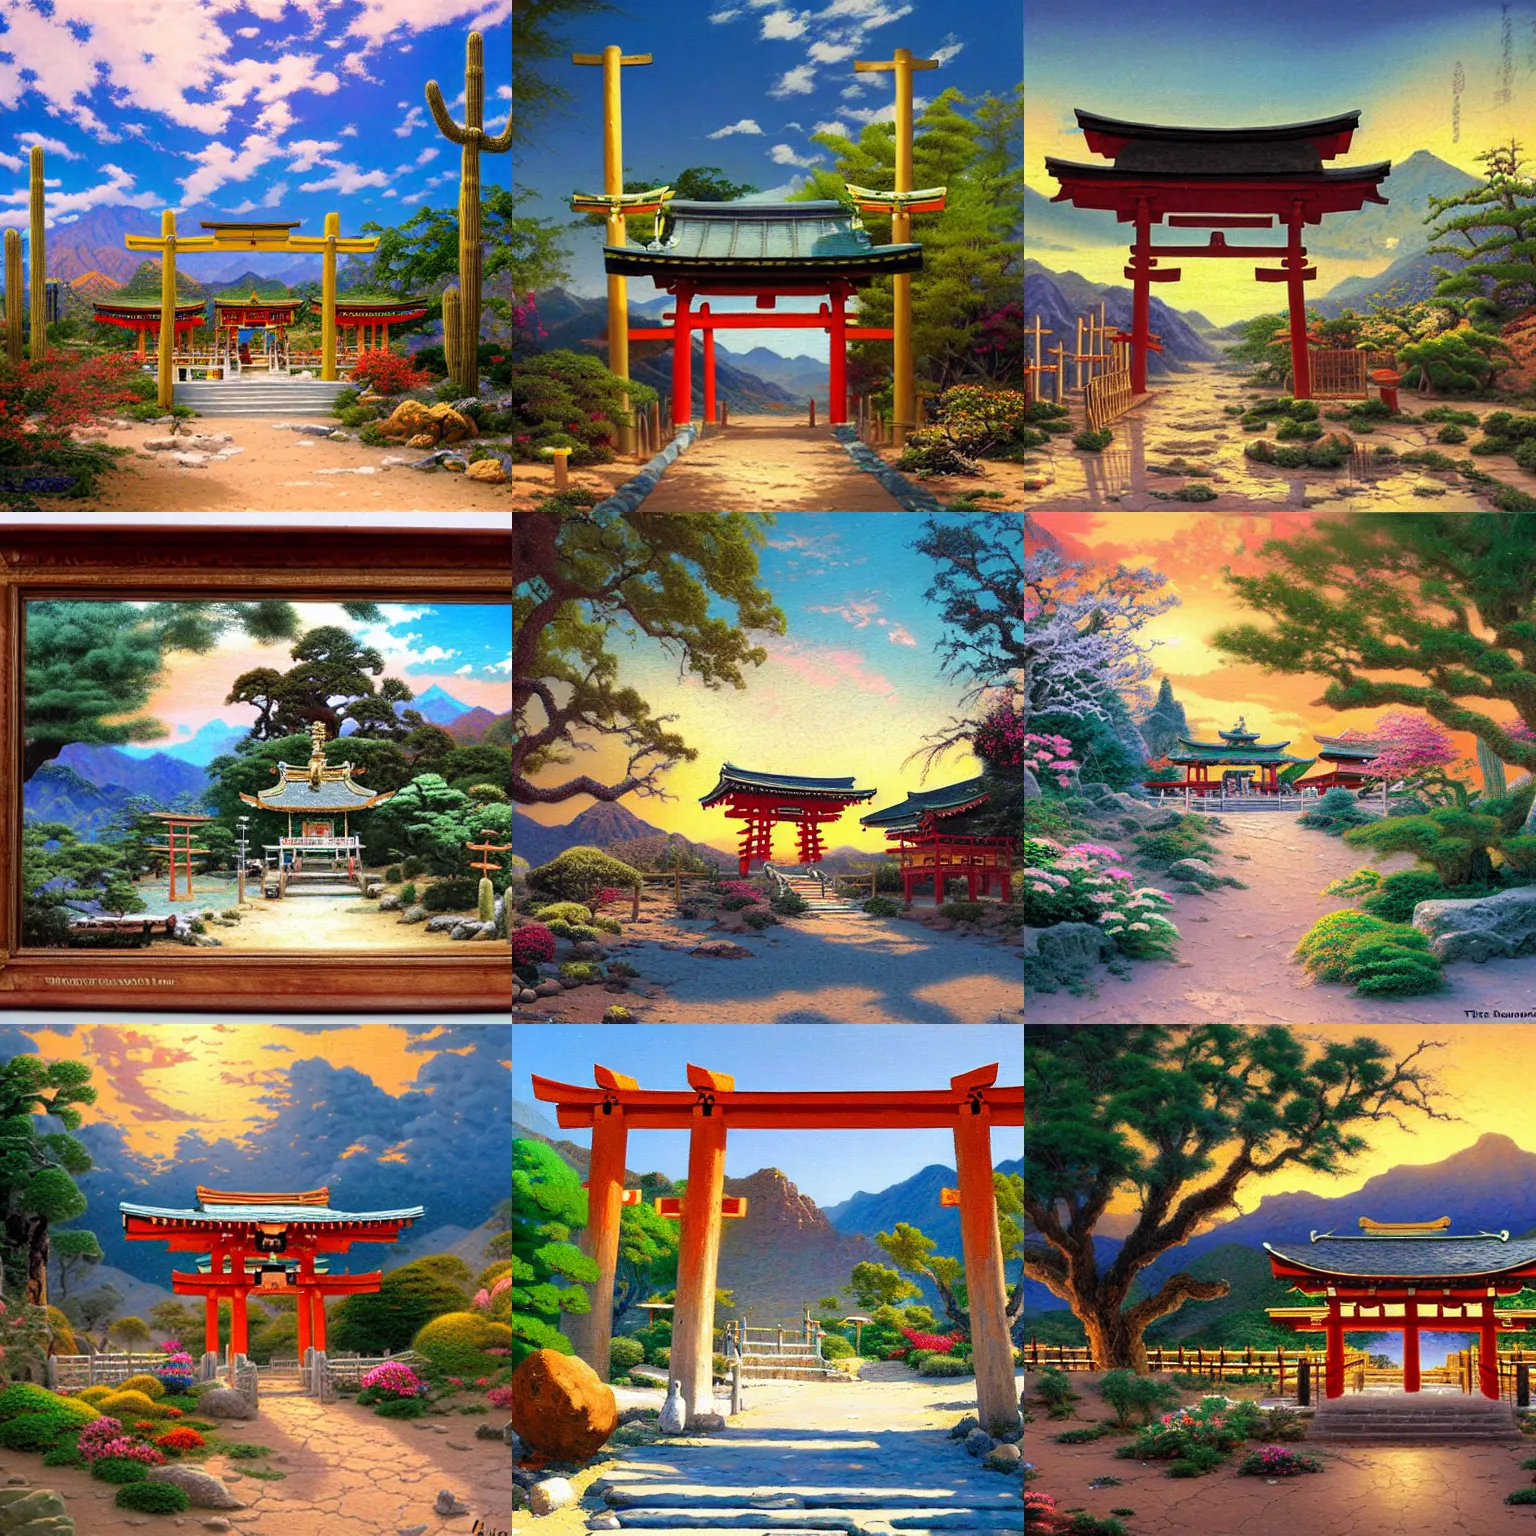 Prompt: a shinto shrine in the desert southwest, painting by Thomas Kinkade